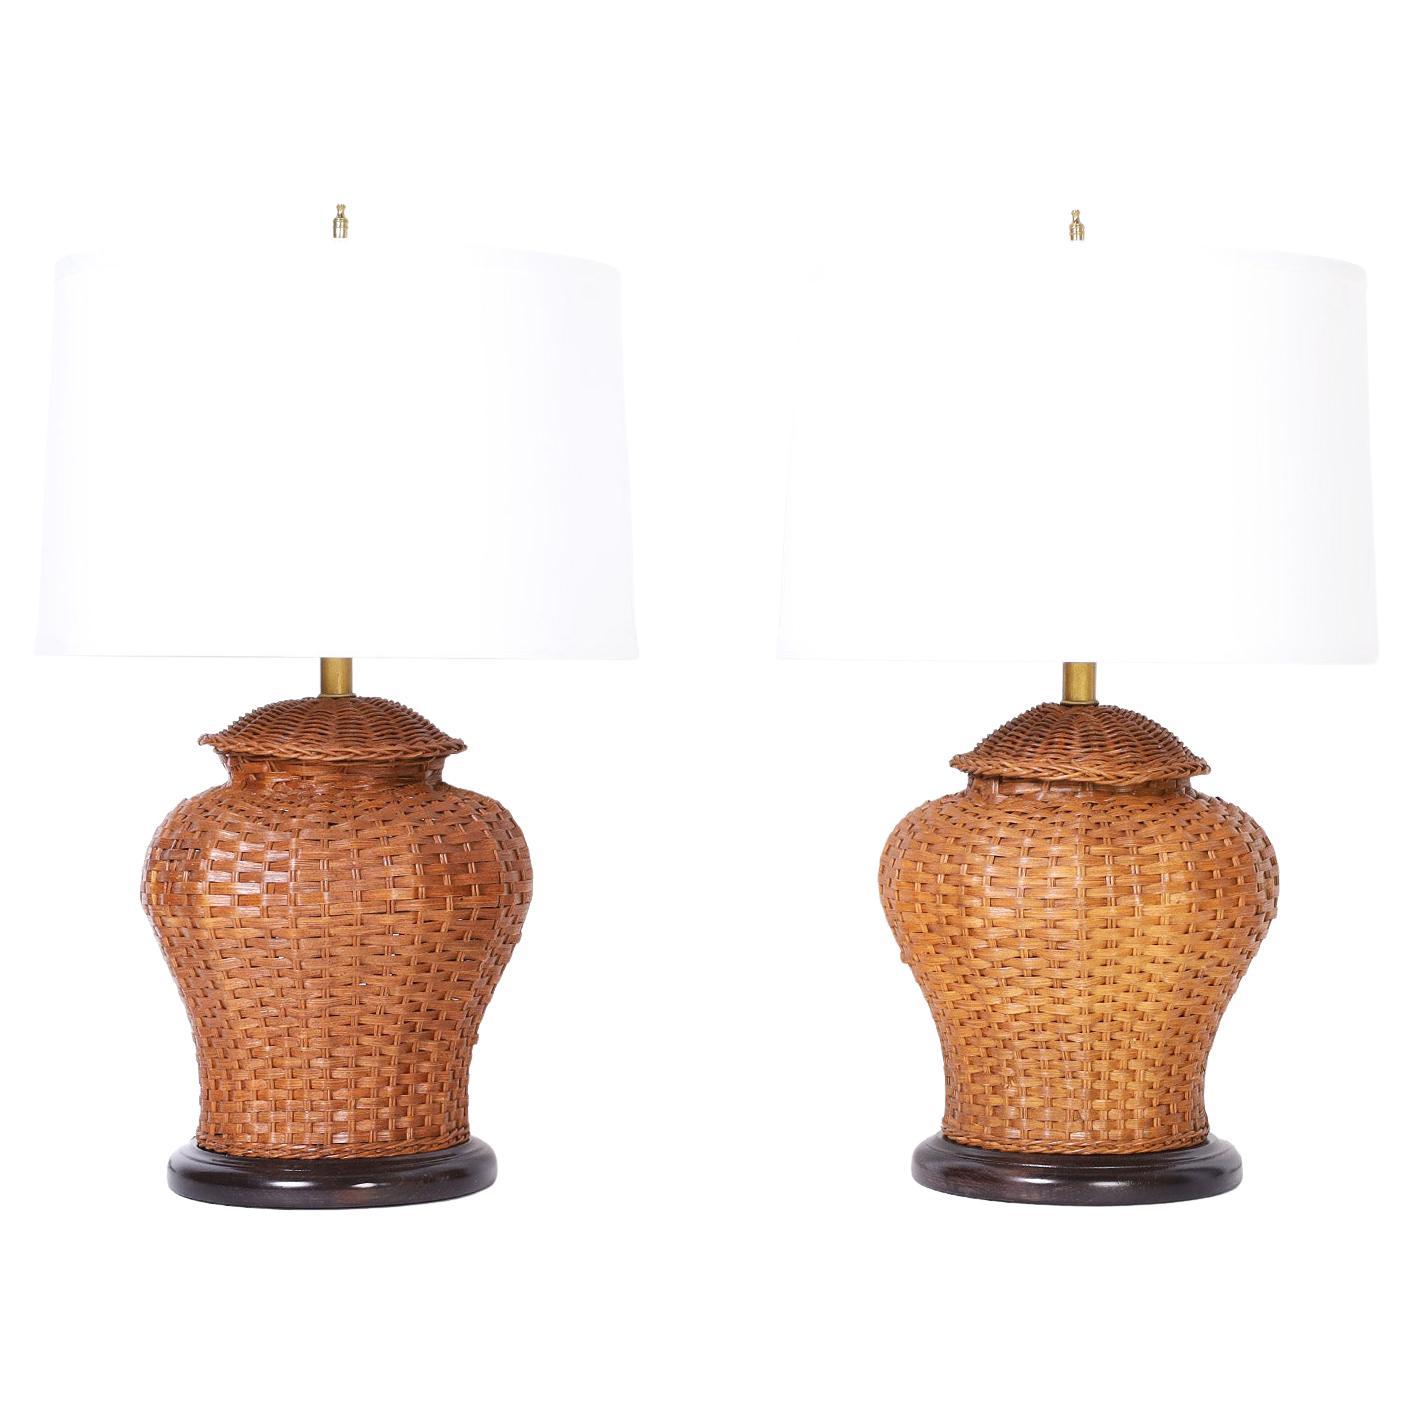 Pair of Ginger Jar Form Wicker Table Lamps